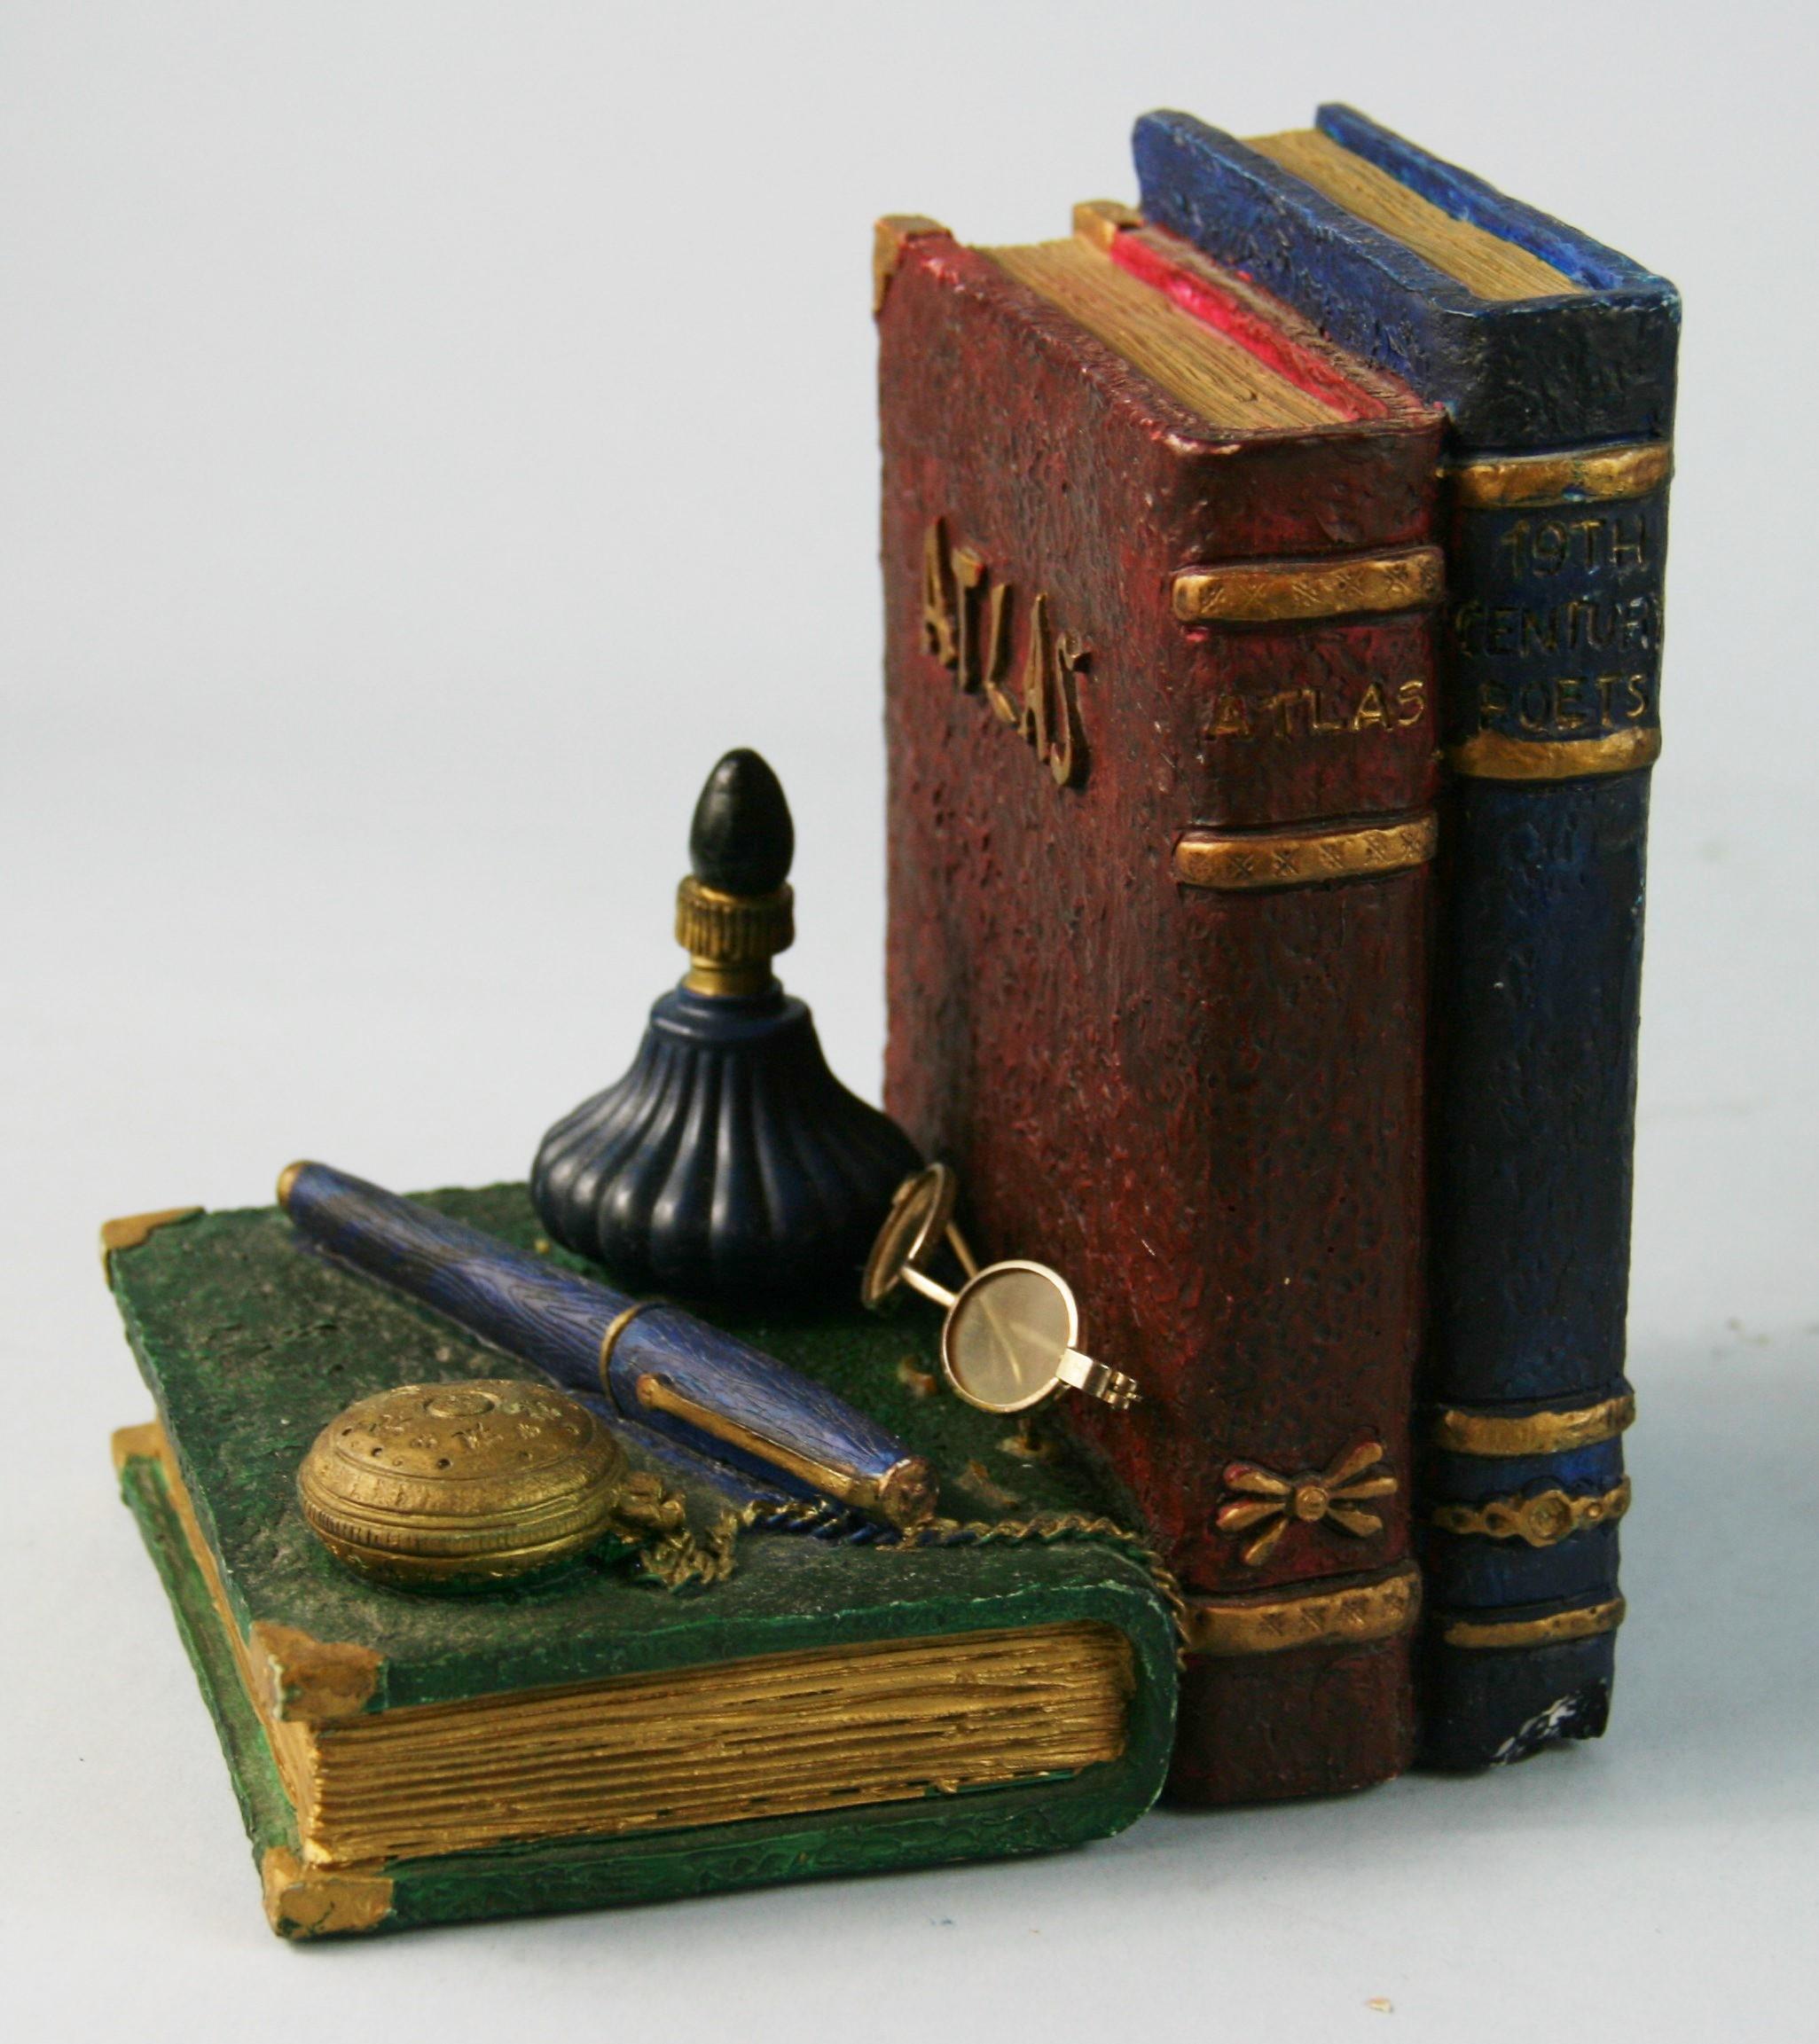 Composition Pair Book and Pen Bookends